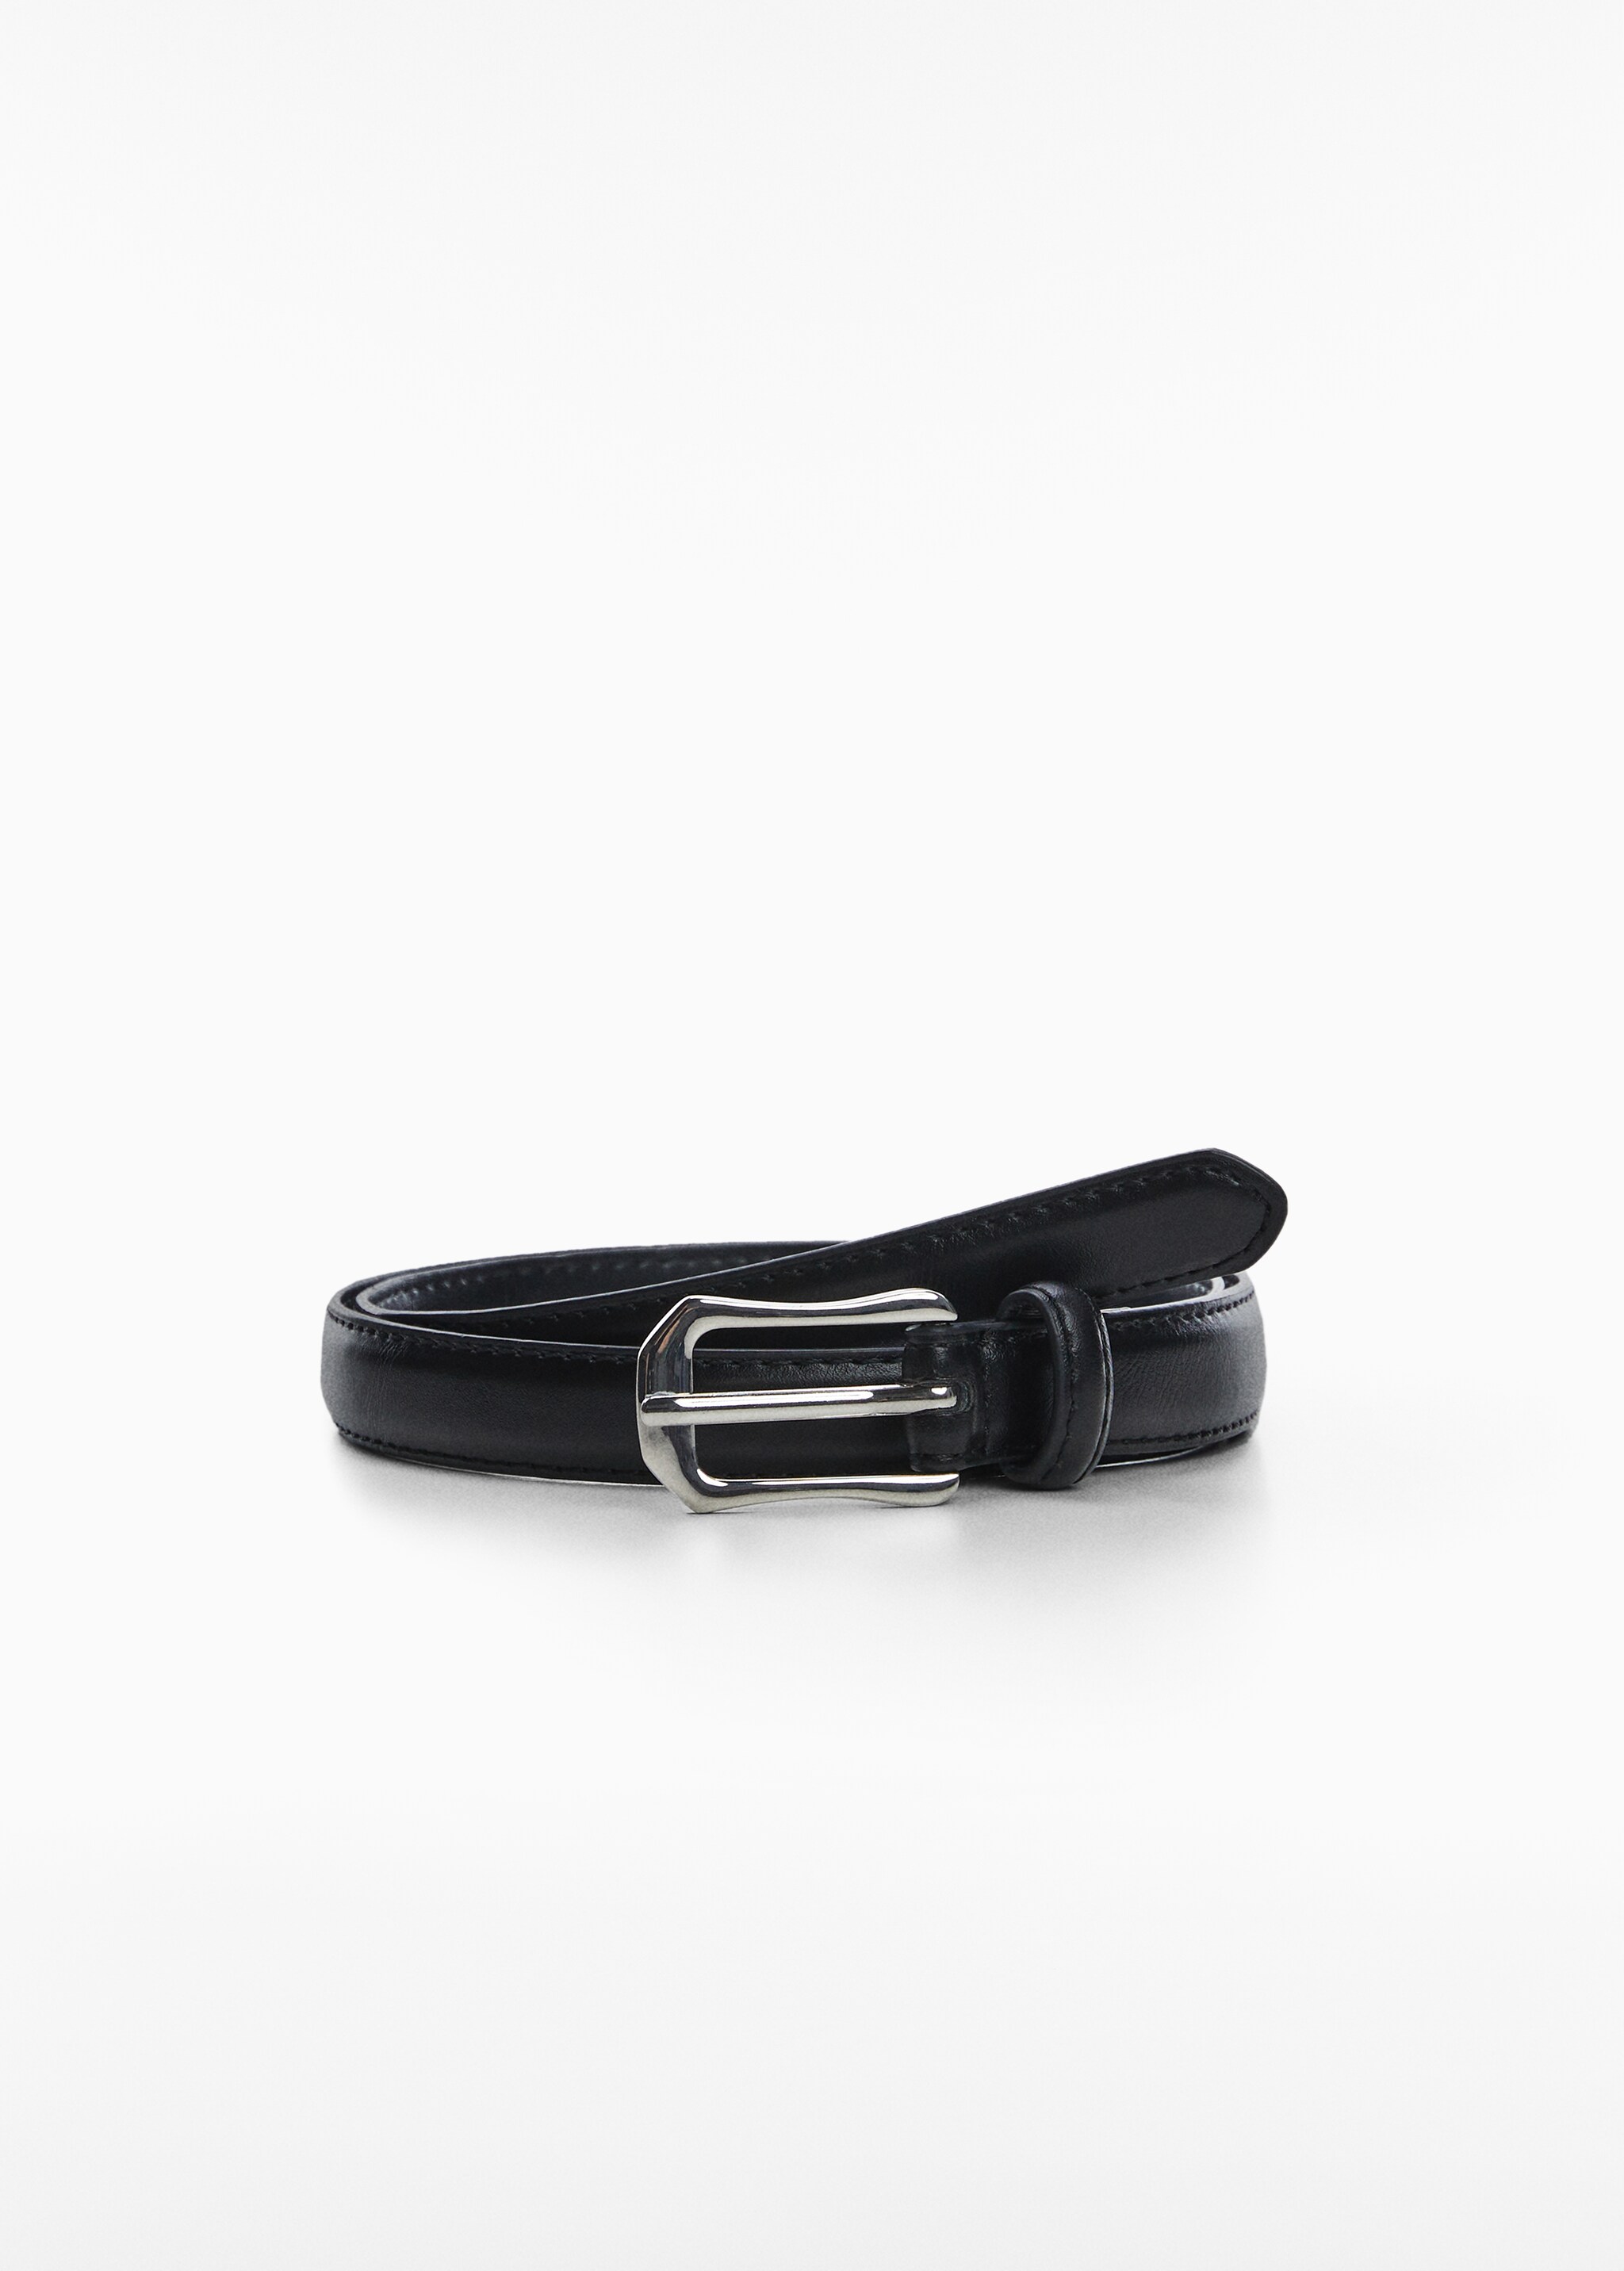 Rectangular buckle belt - Article without model